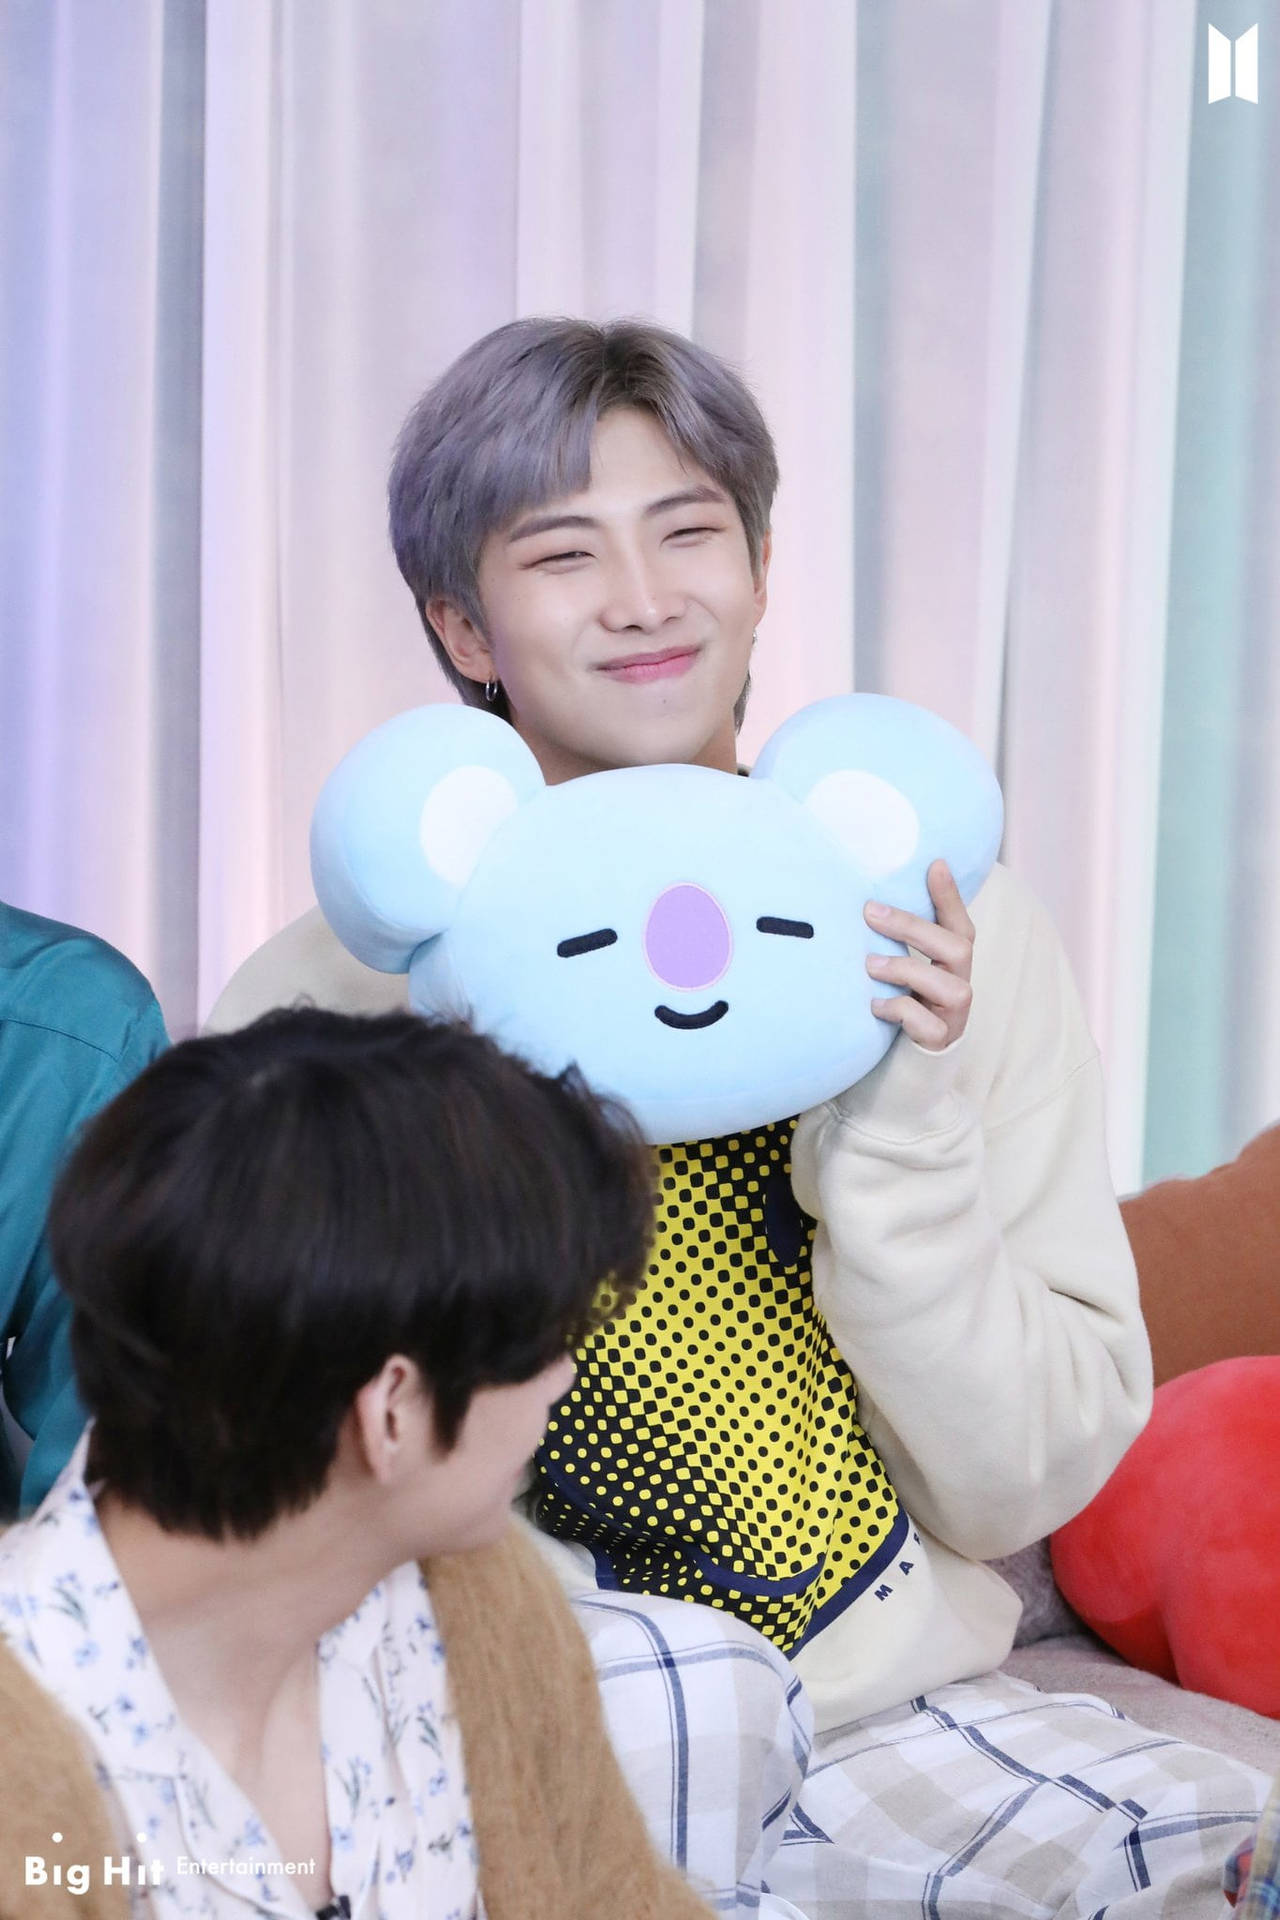 Caption: Adorable RM Plush Toy Inspired by BTS Band Member Wallpaper